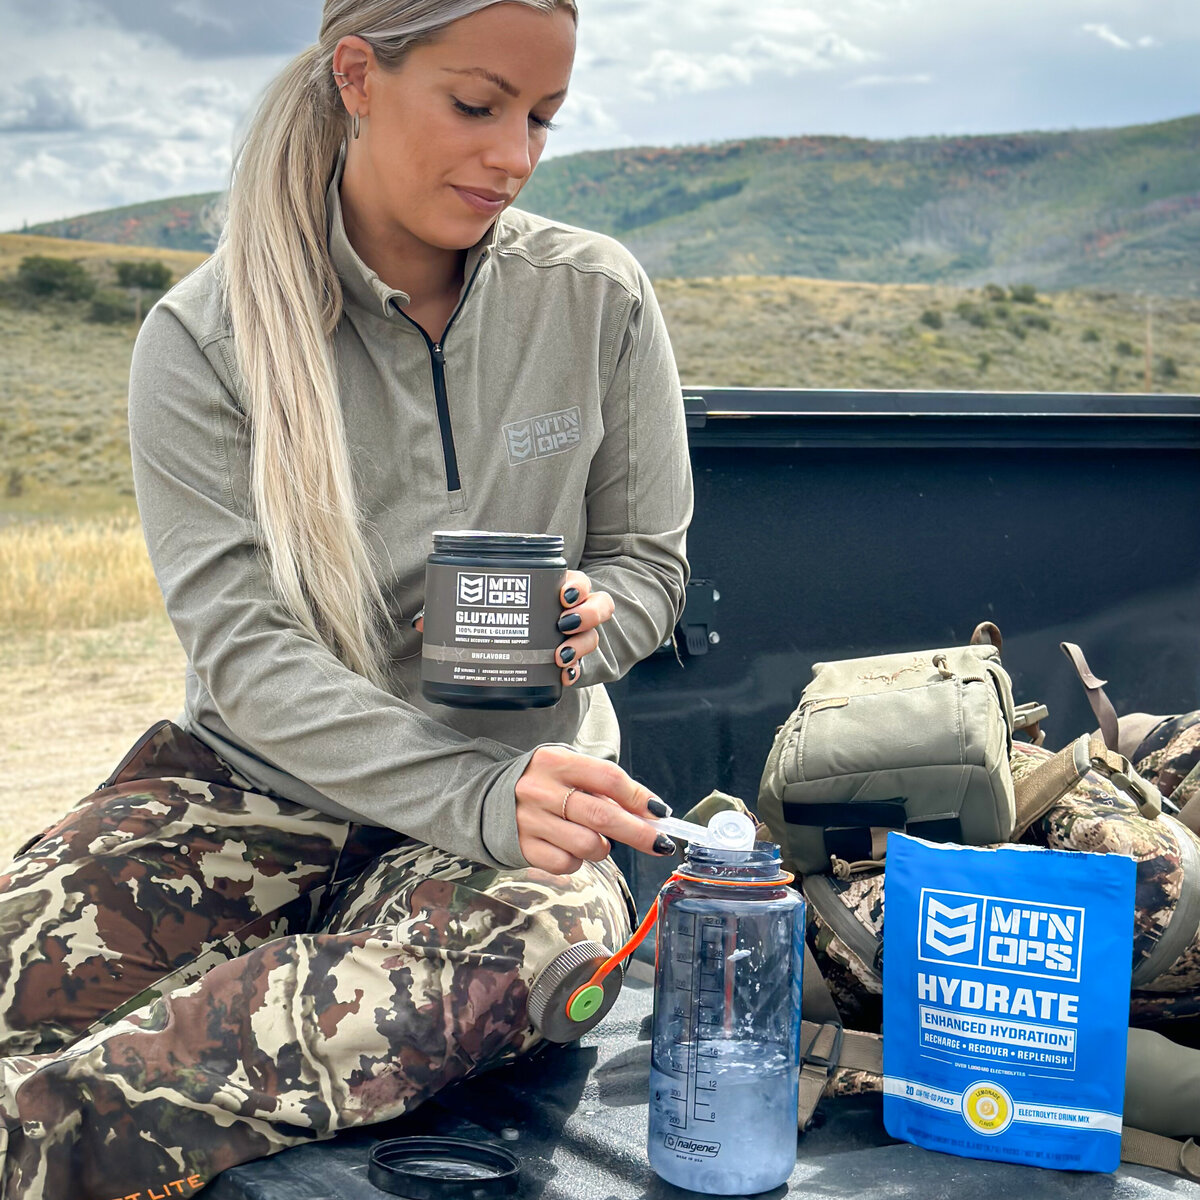 MTN-OPS-Glutamine-hydrate-on-tailgate-1